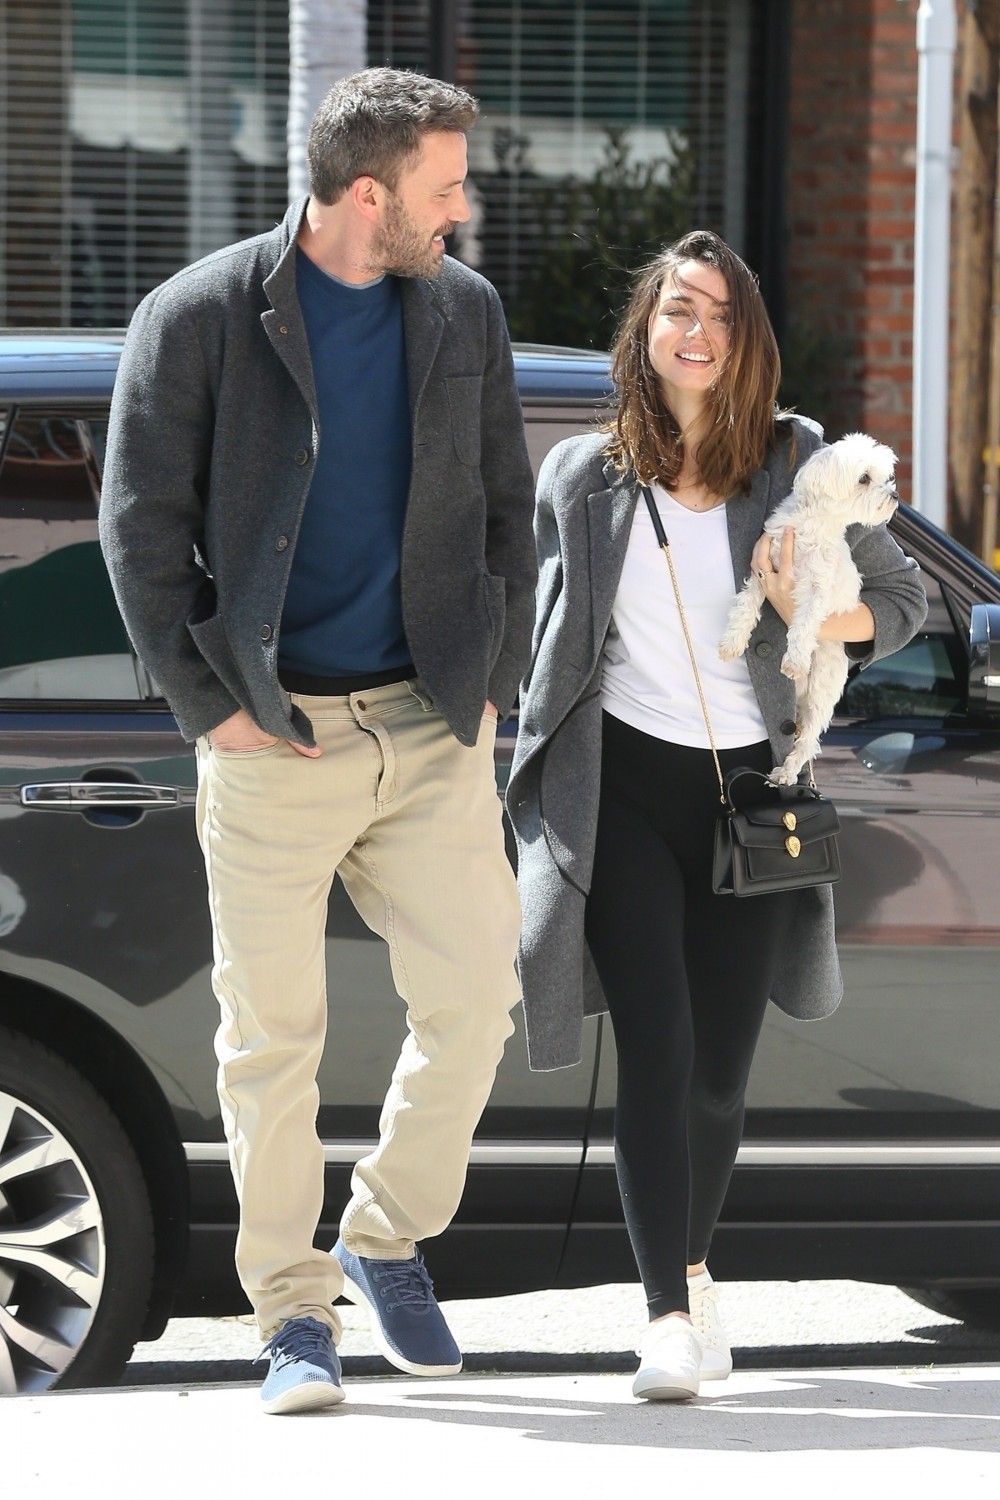 New couple Ben Affleck and Ana de Armas look happy while on a coffee run